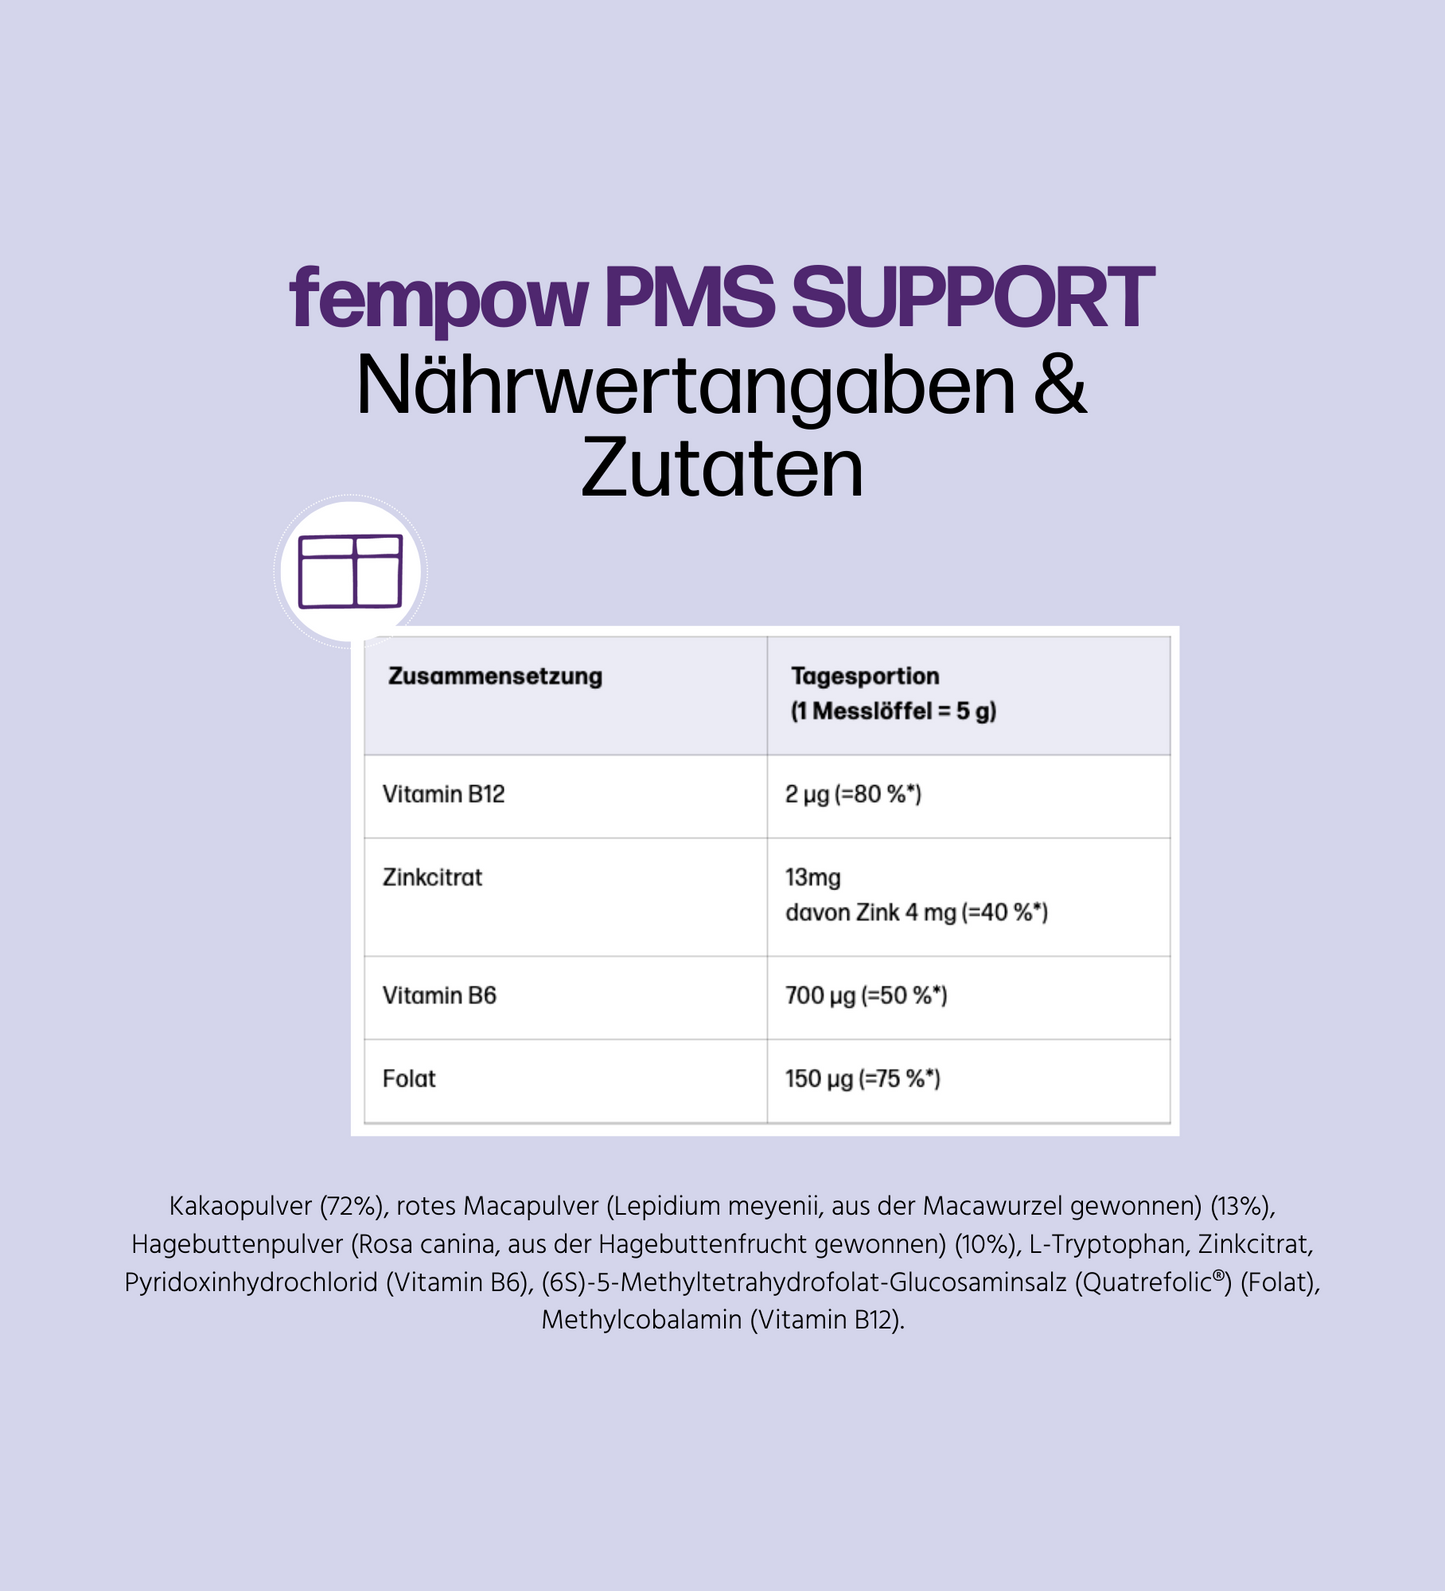 fempow PMS SUPPORT*